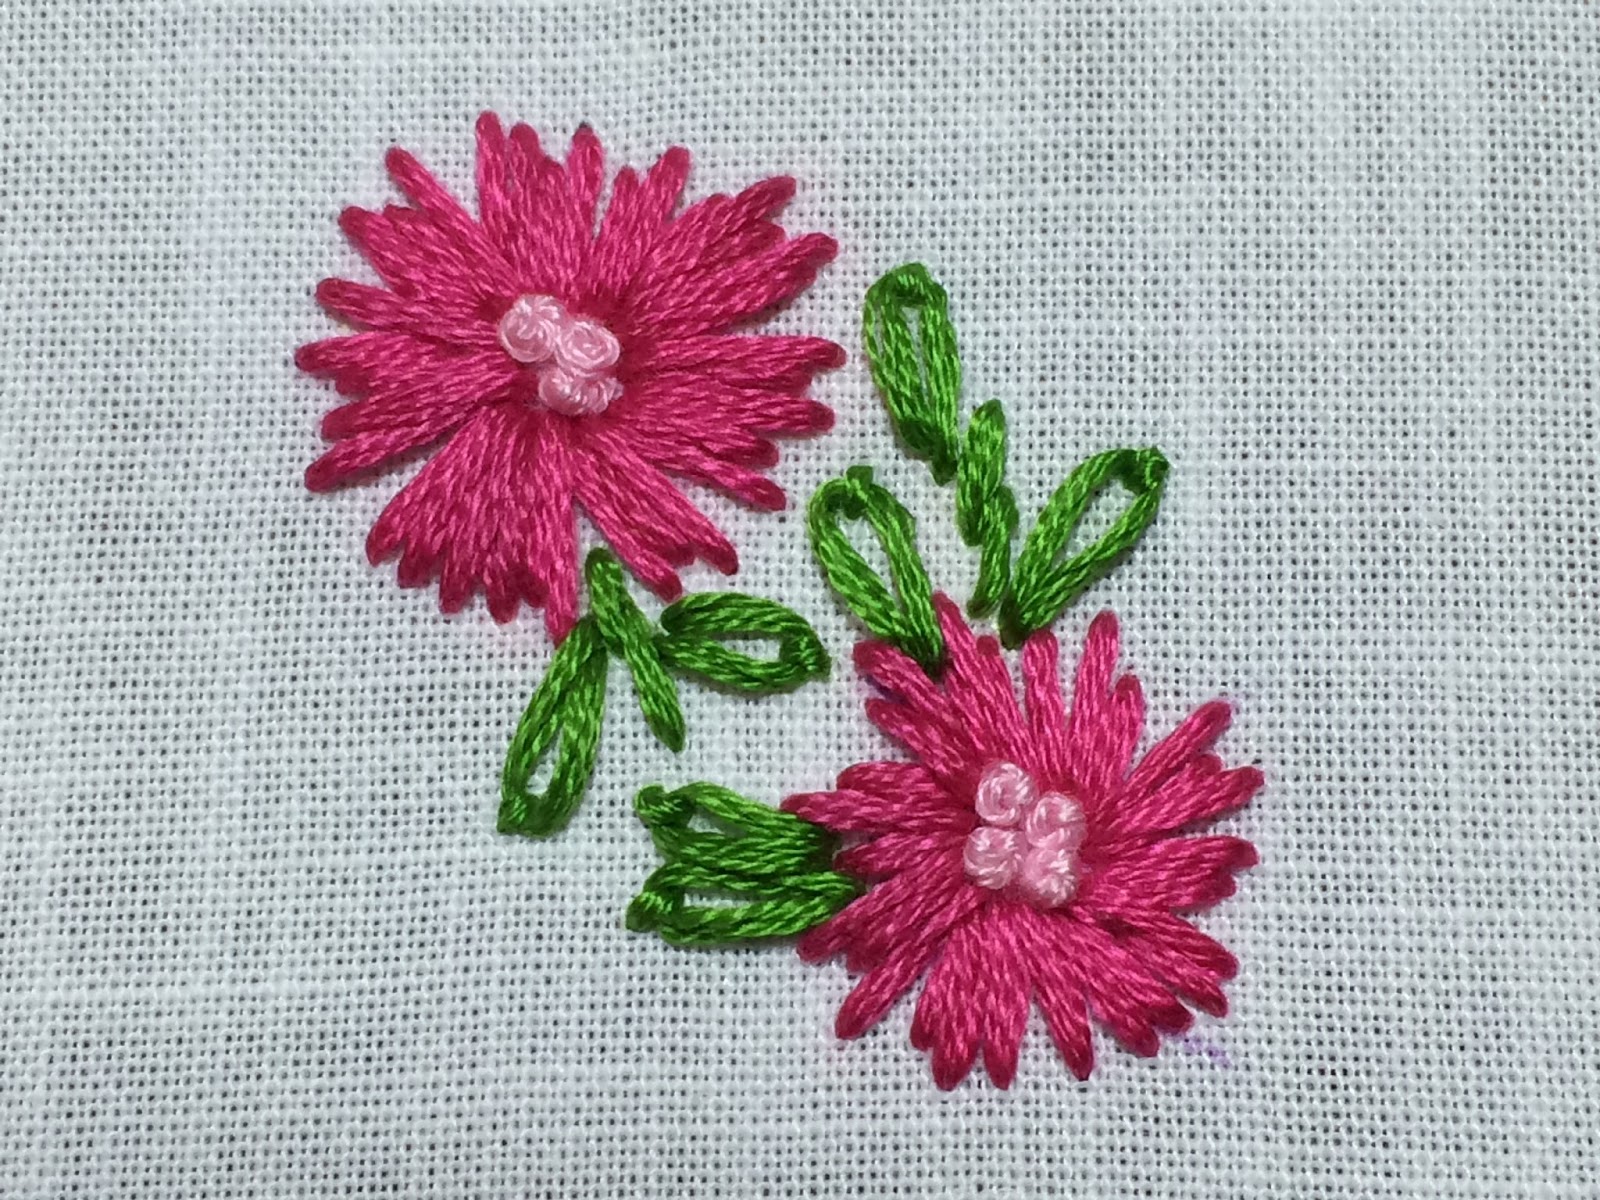 straight stitch embroidered flowers